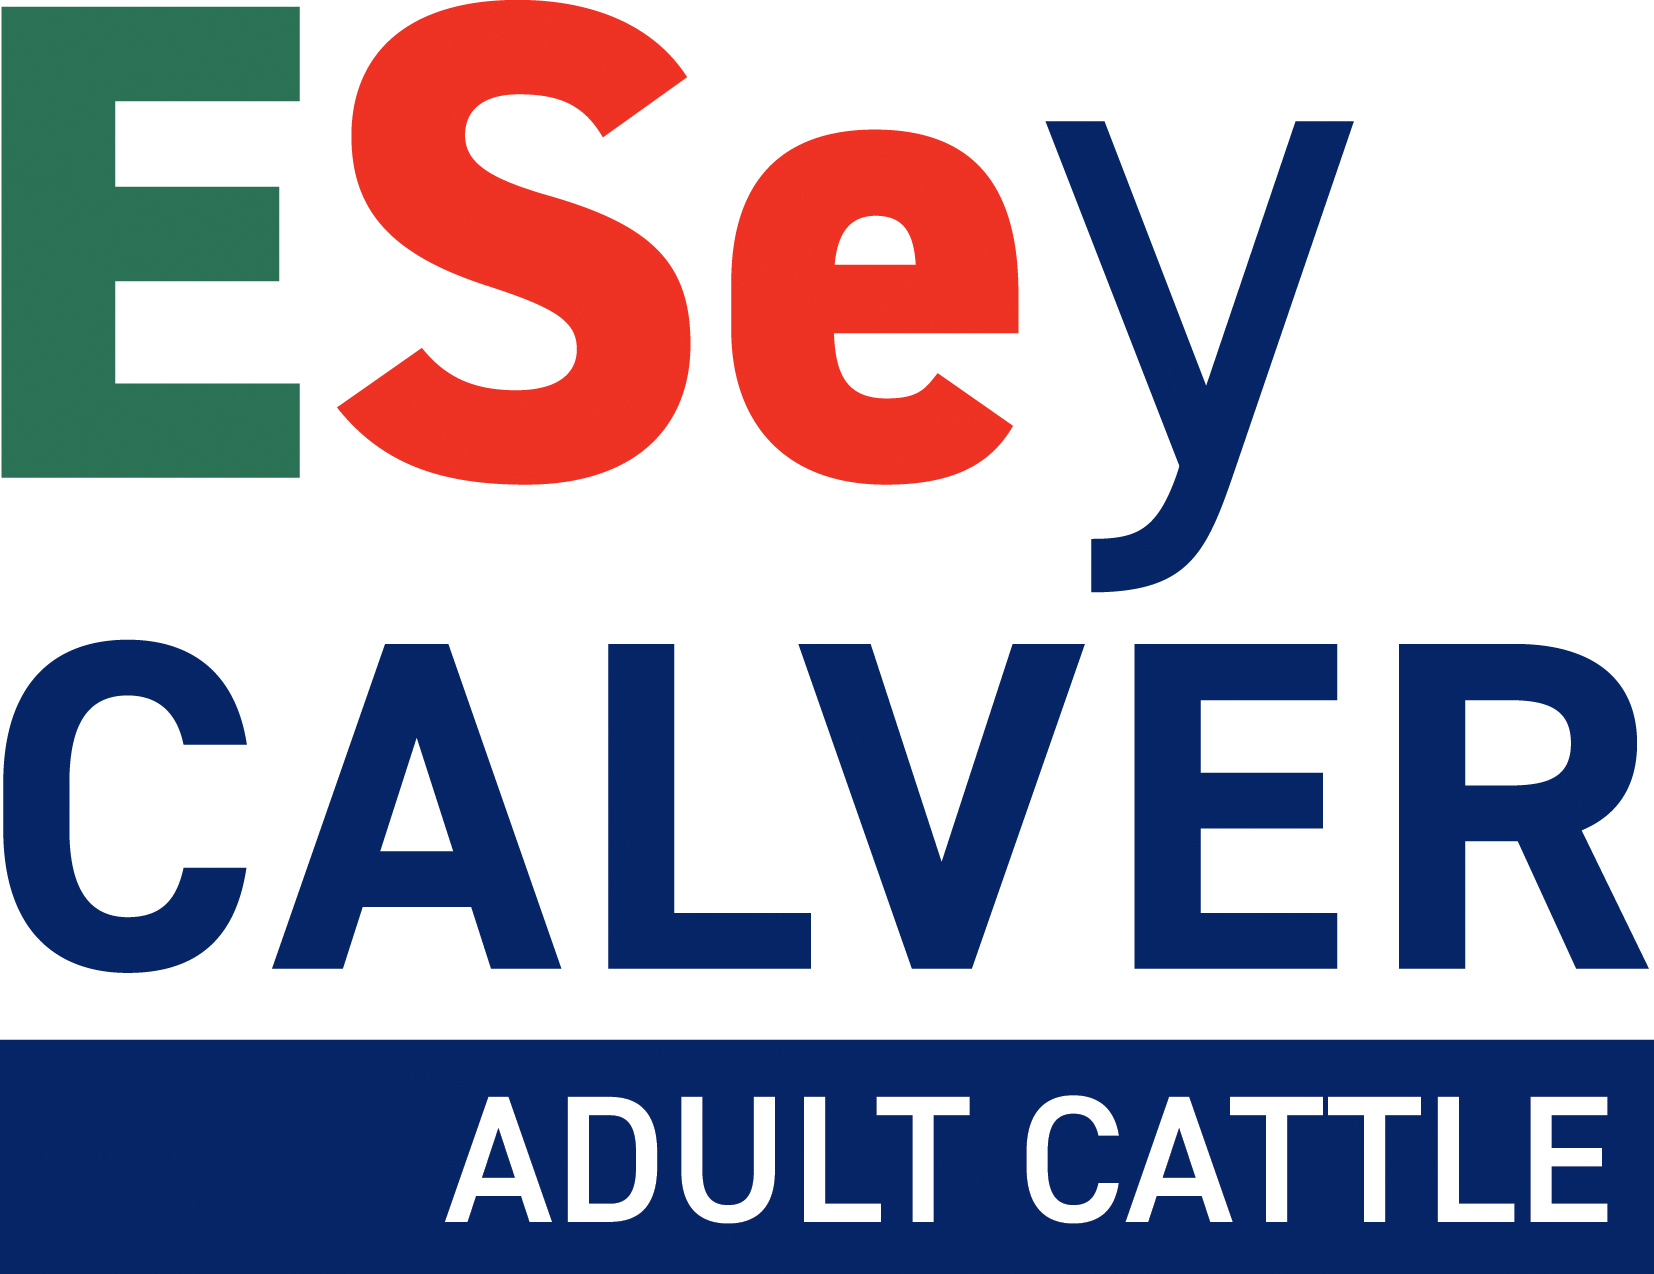 Beef Cattle ESey CALVER ADULT CATTLE